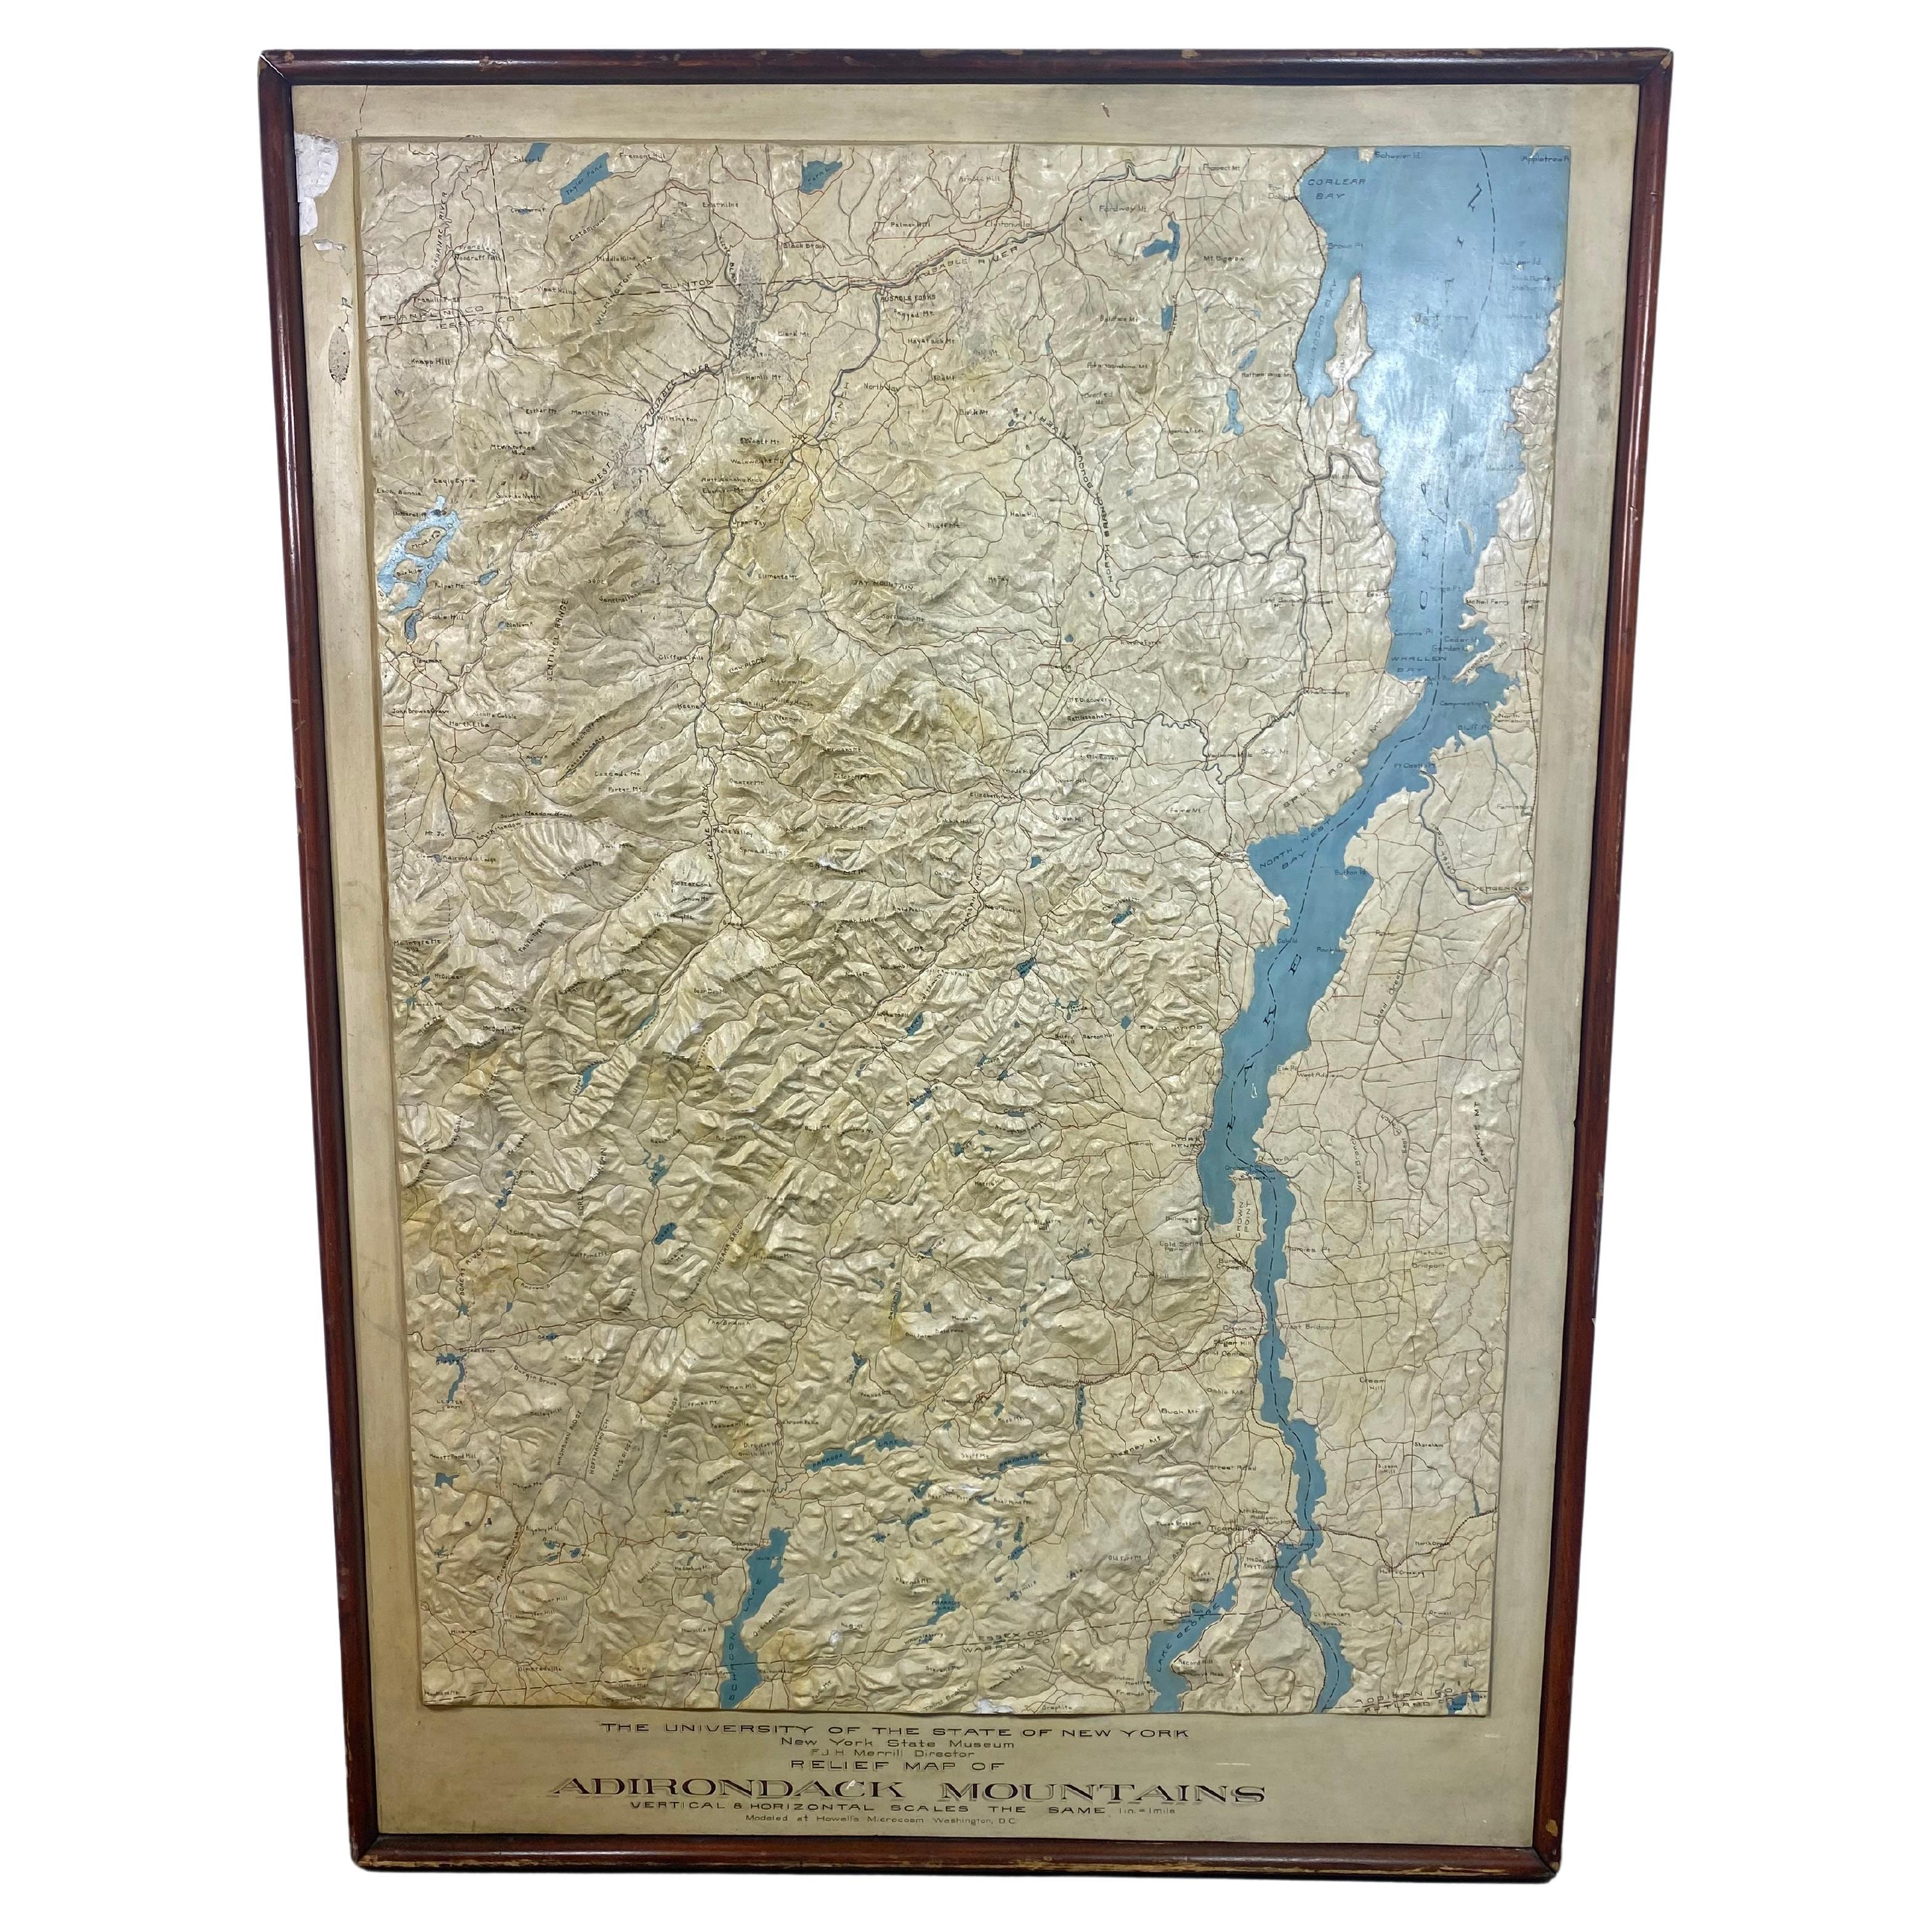 Rare and Early Plaster Relief Map of Adirondack Mountains by F J H Merrill For Sale